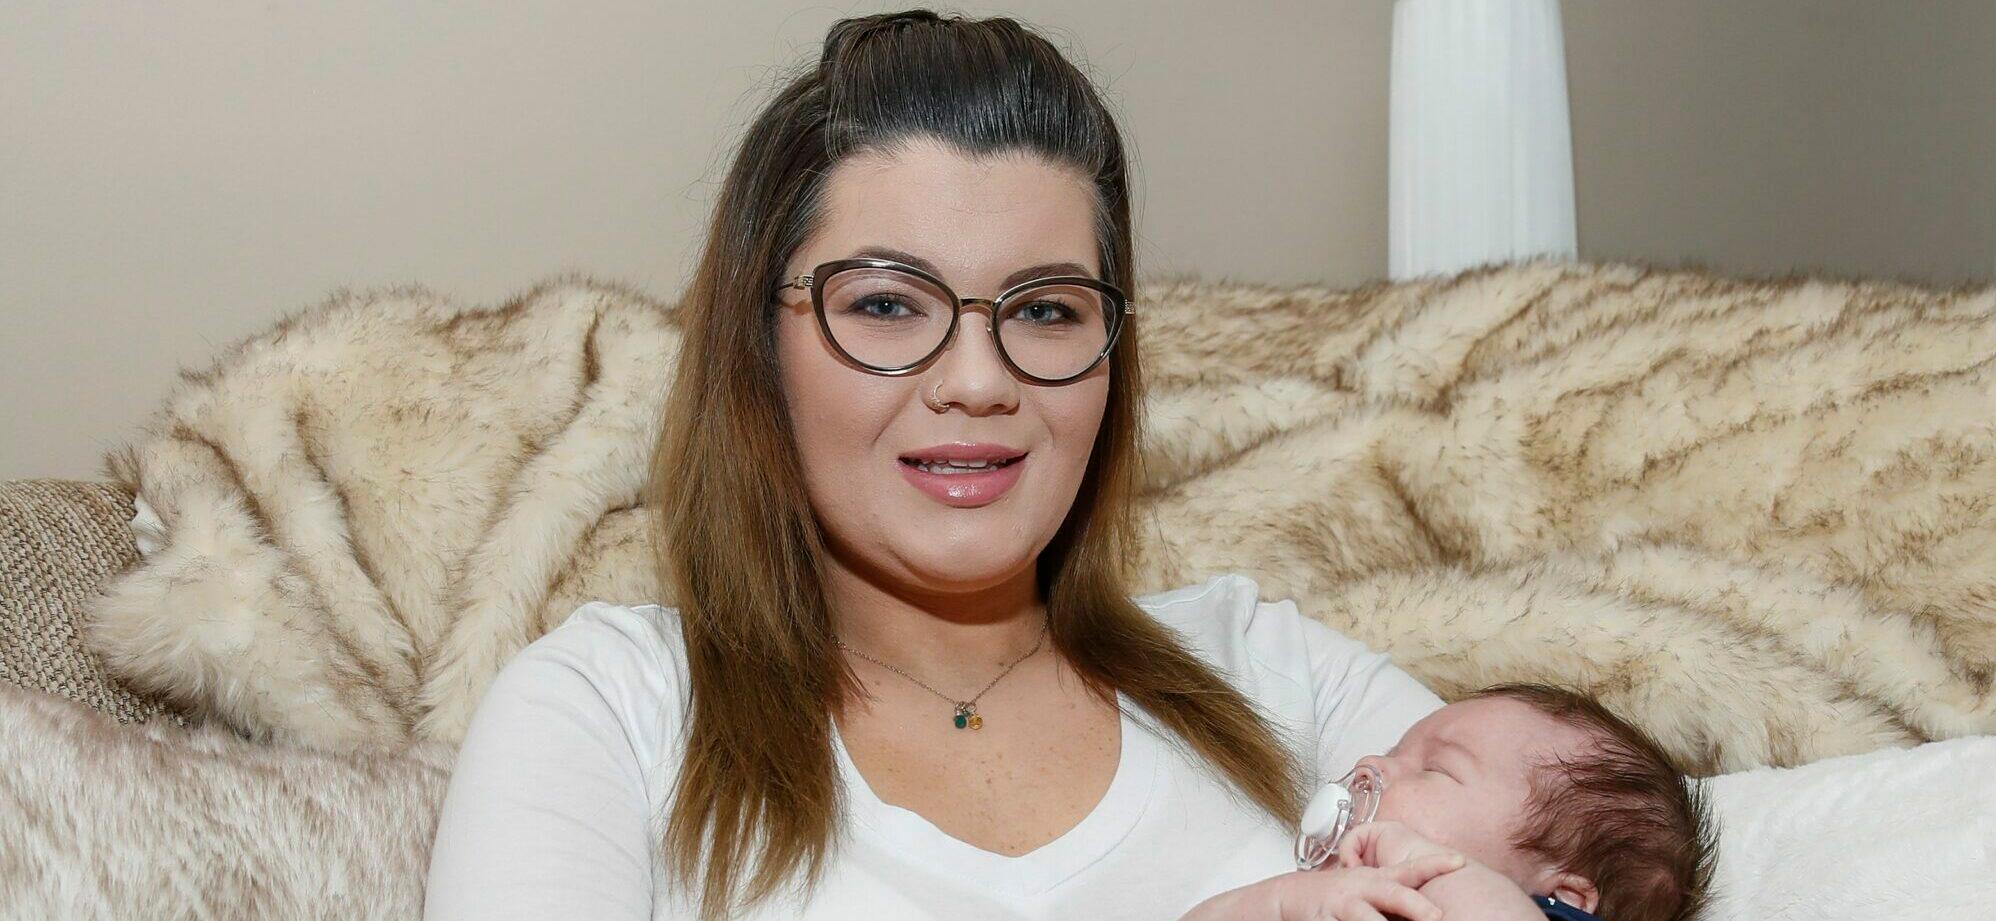 Amber Portwood with her baby James in Indianapolis